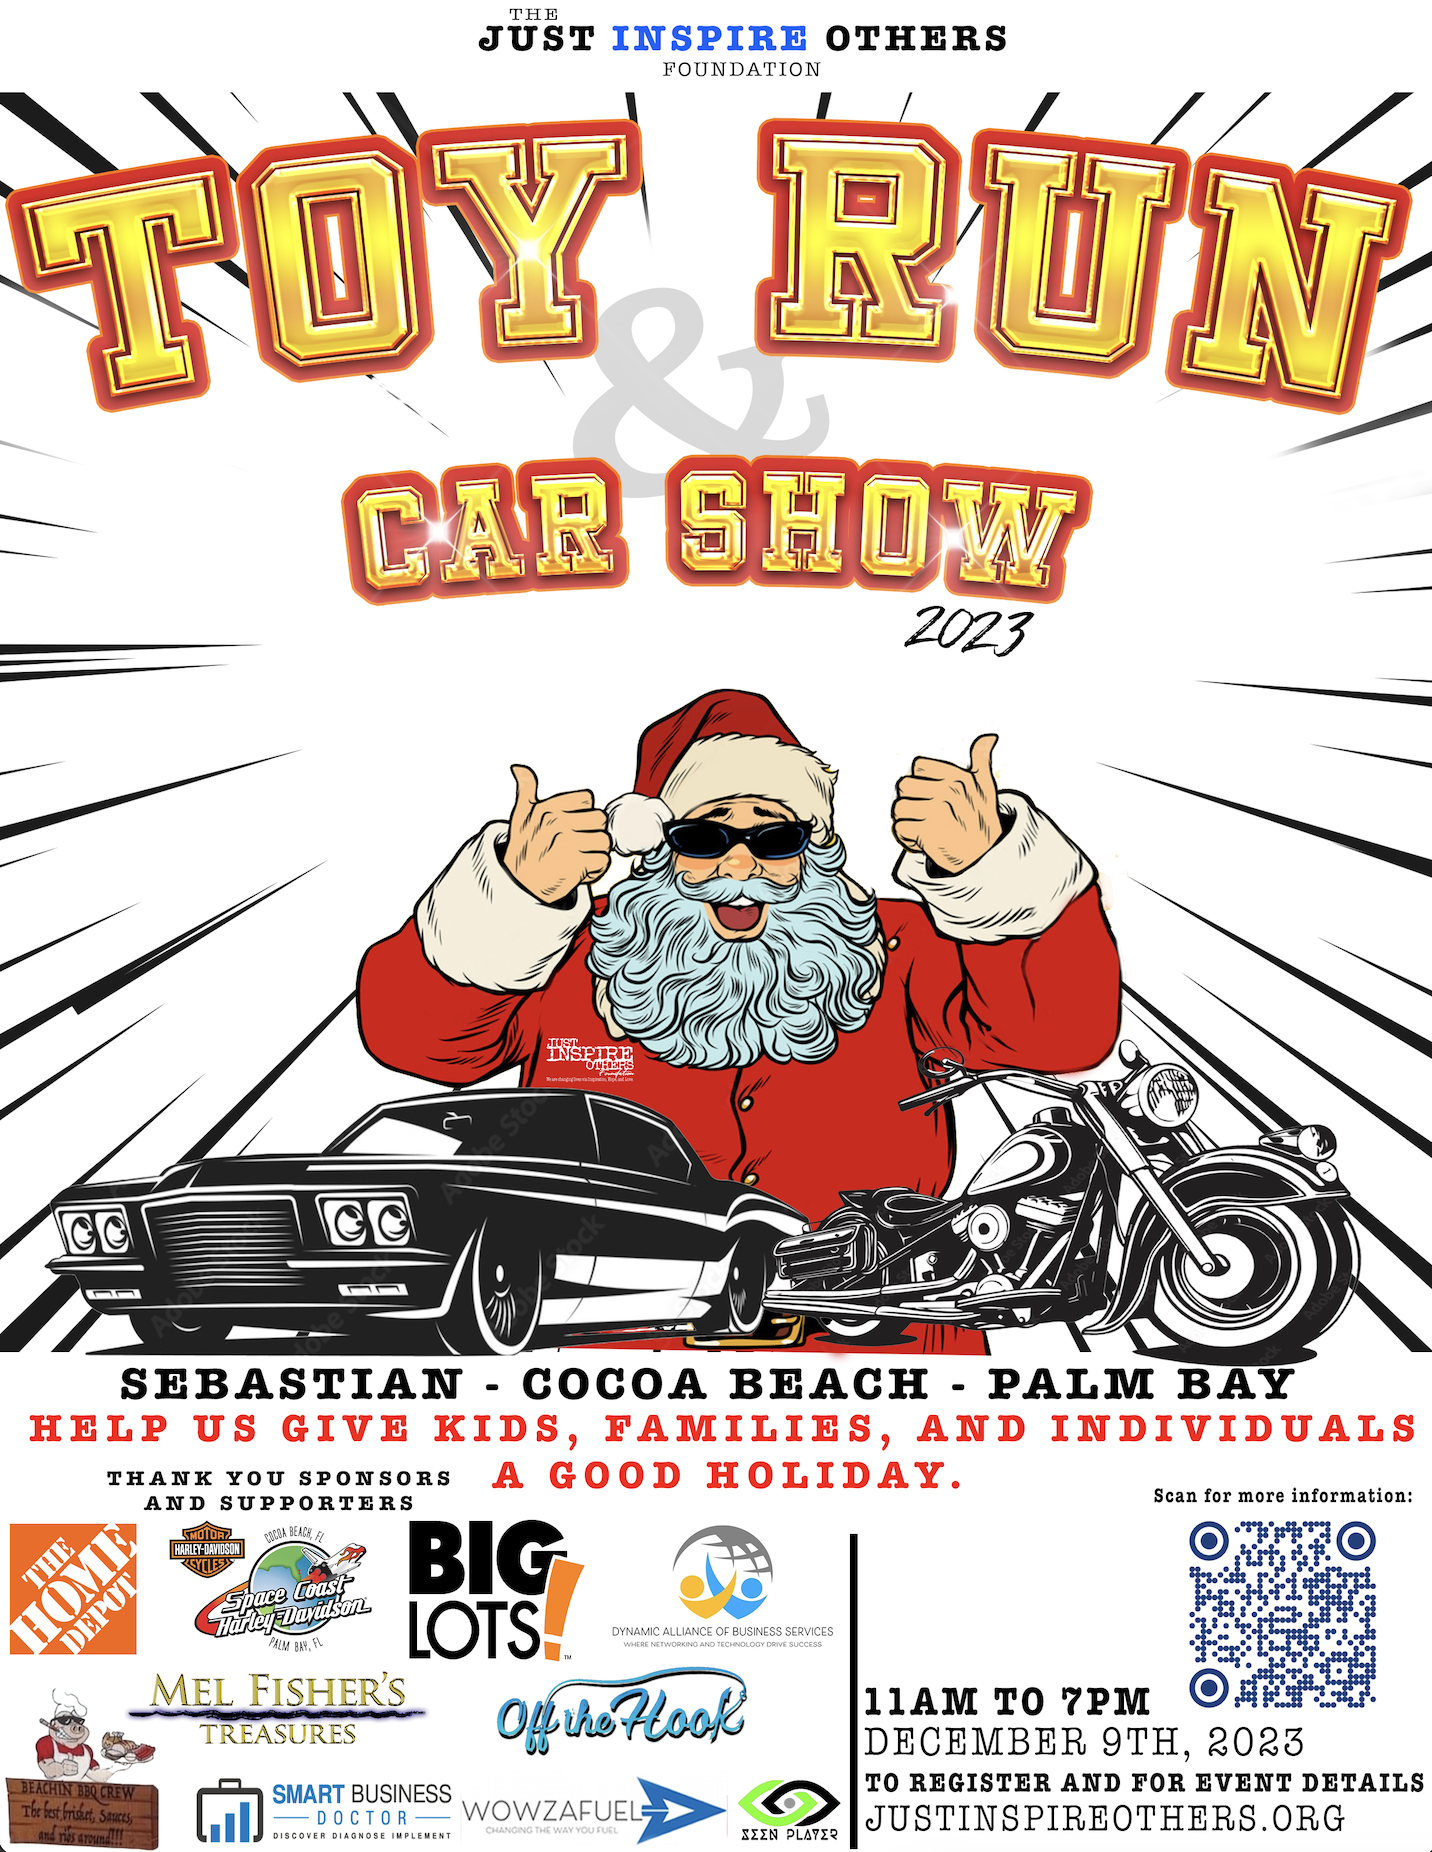 1st Annual Toy Run and Car Show - Just Inspire Others - New 501c3 Non-Profit - Changing Lives